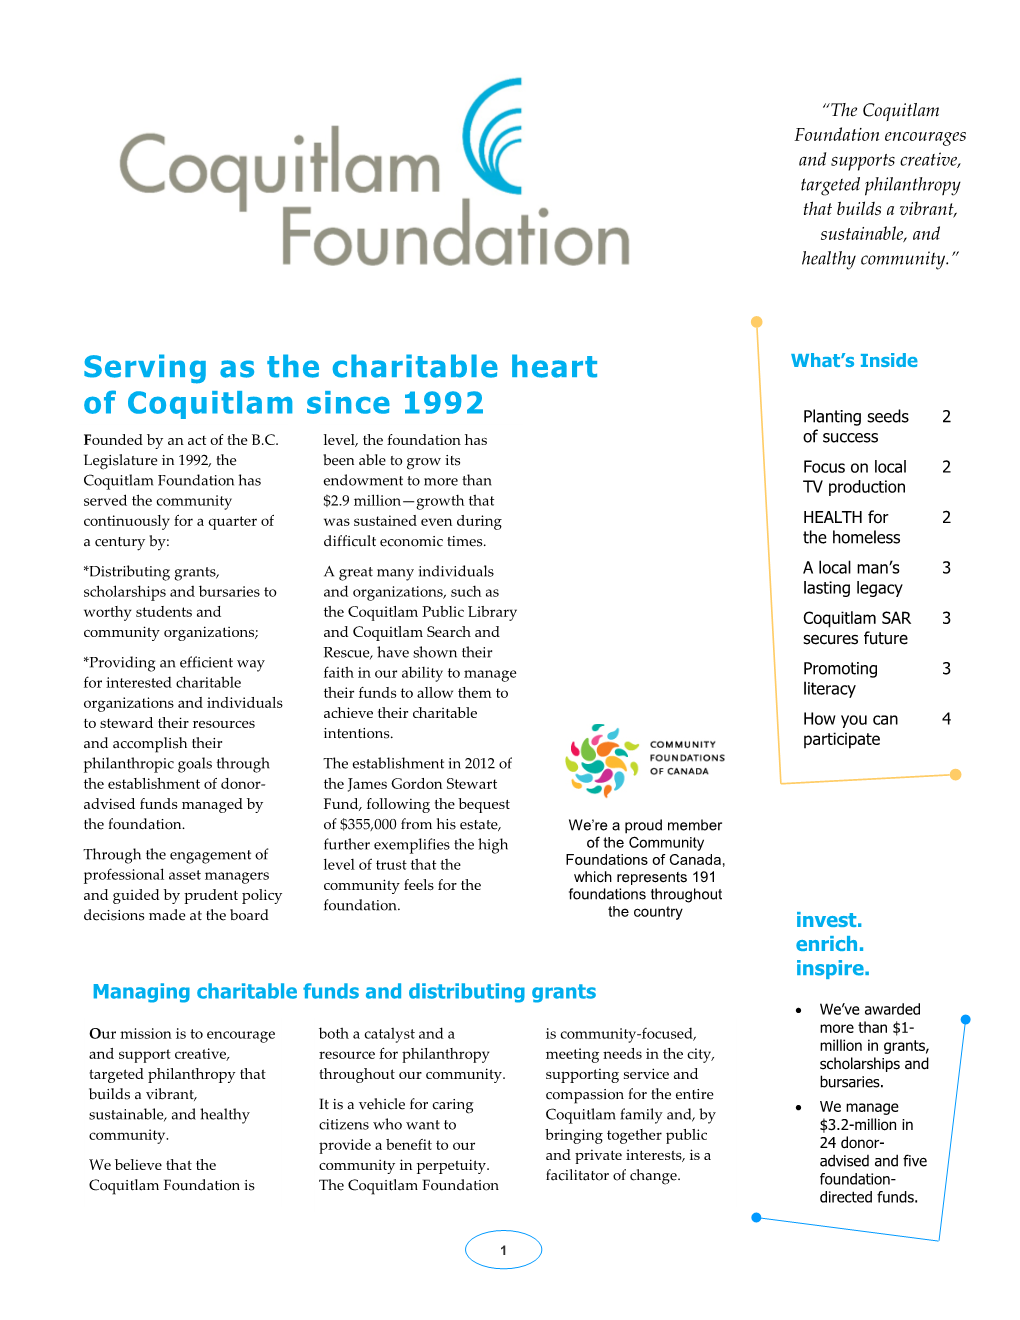 Pamphlet on the Coquitlam Foundation “Our Story”